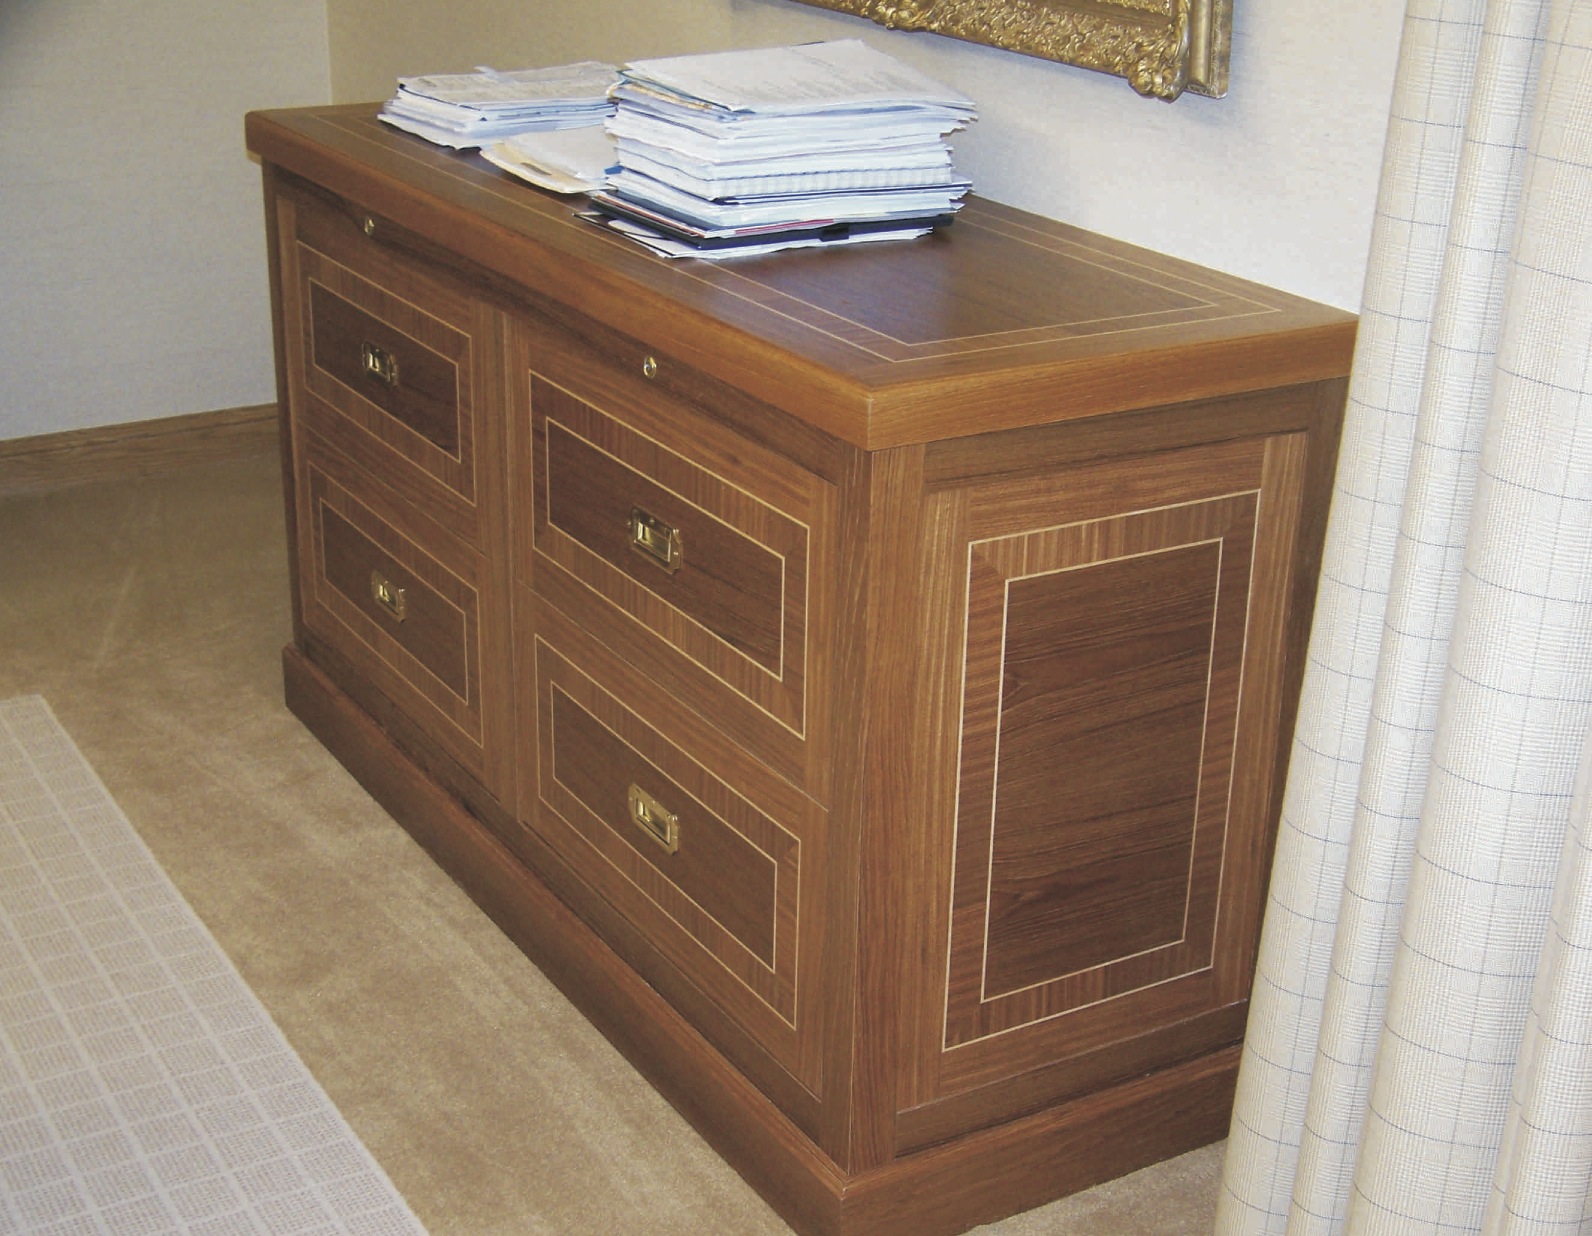 Corporate office file cabinet - West Palm Beach